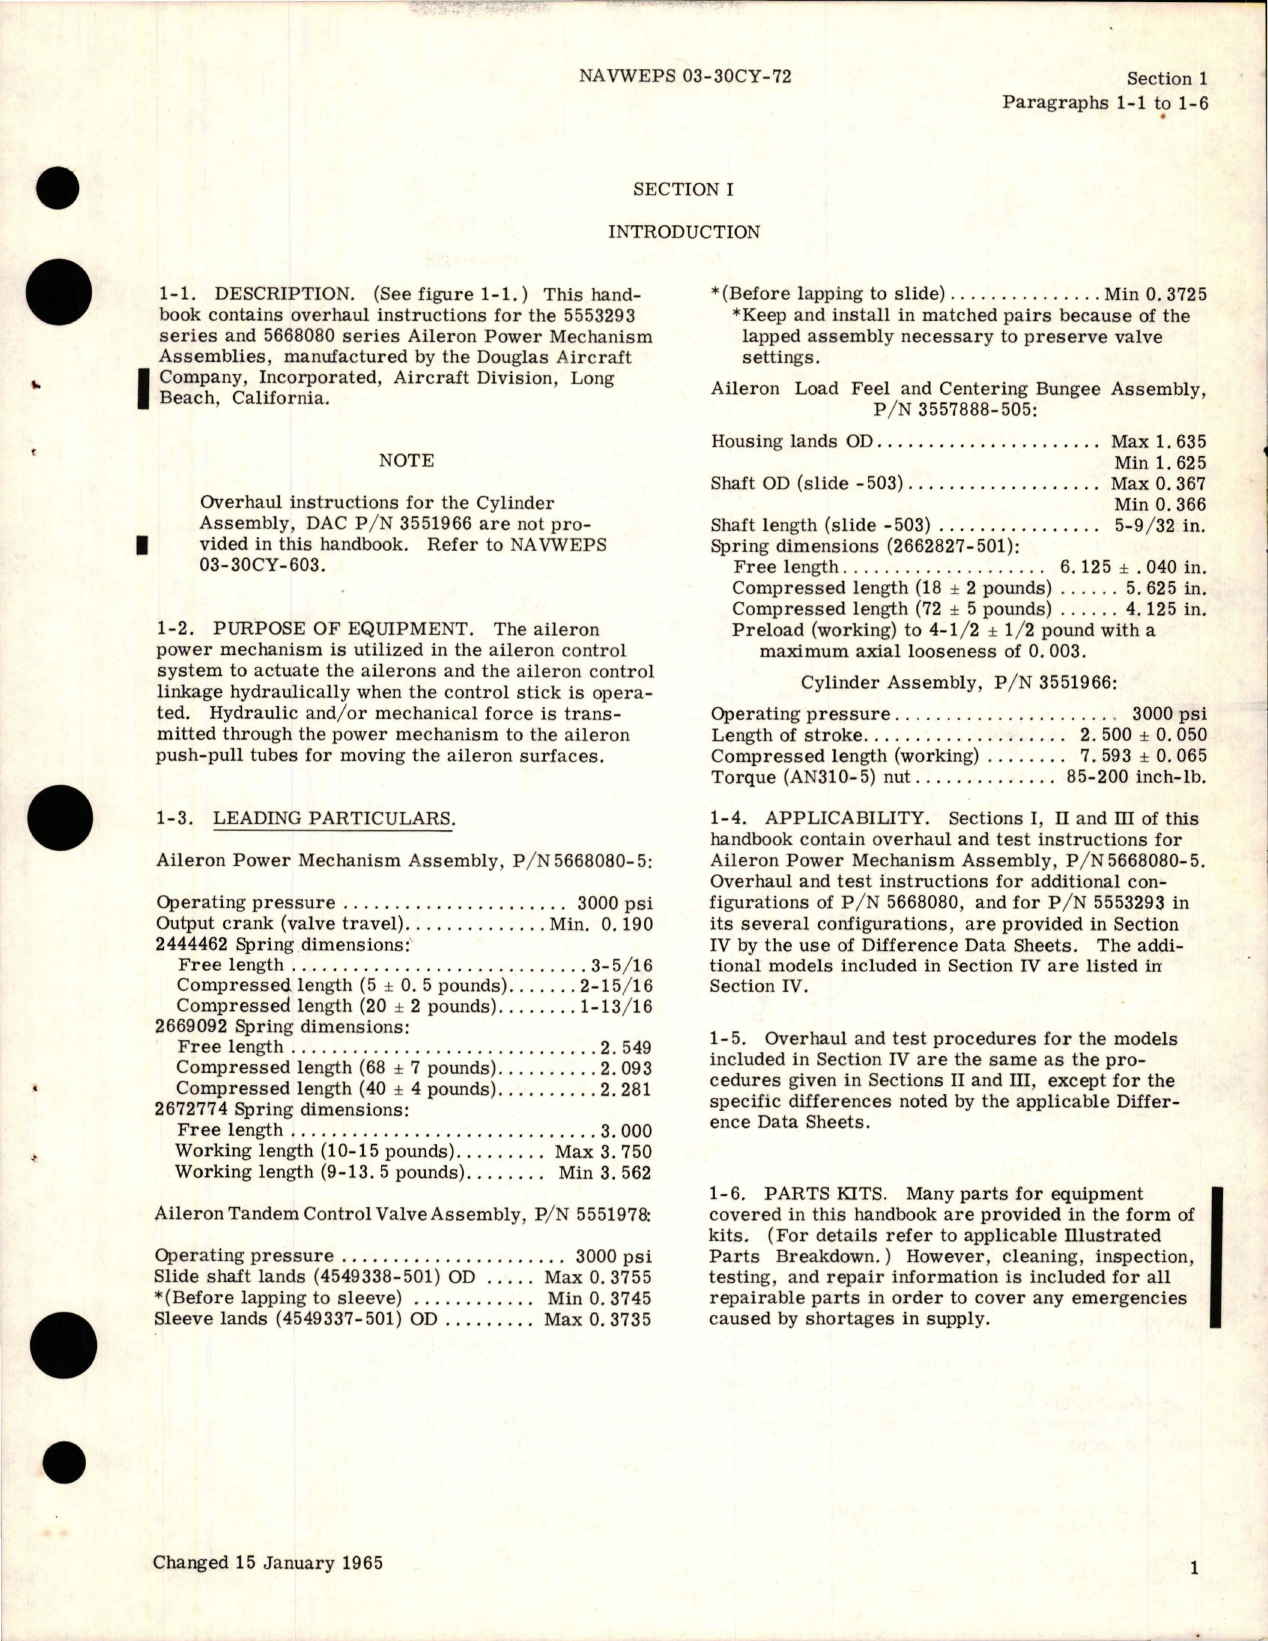 Sample page 5 from AirCorps Library document: Overhaul Instructions for Aileron Power Mechanism 